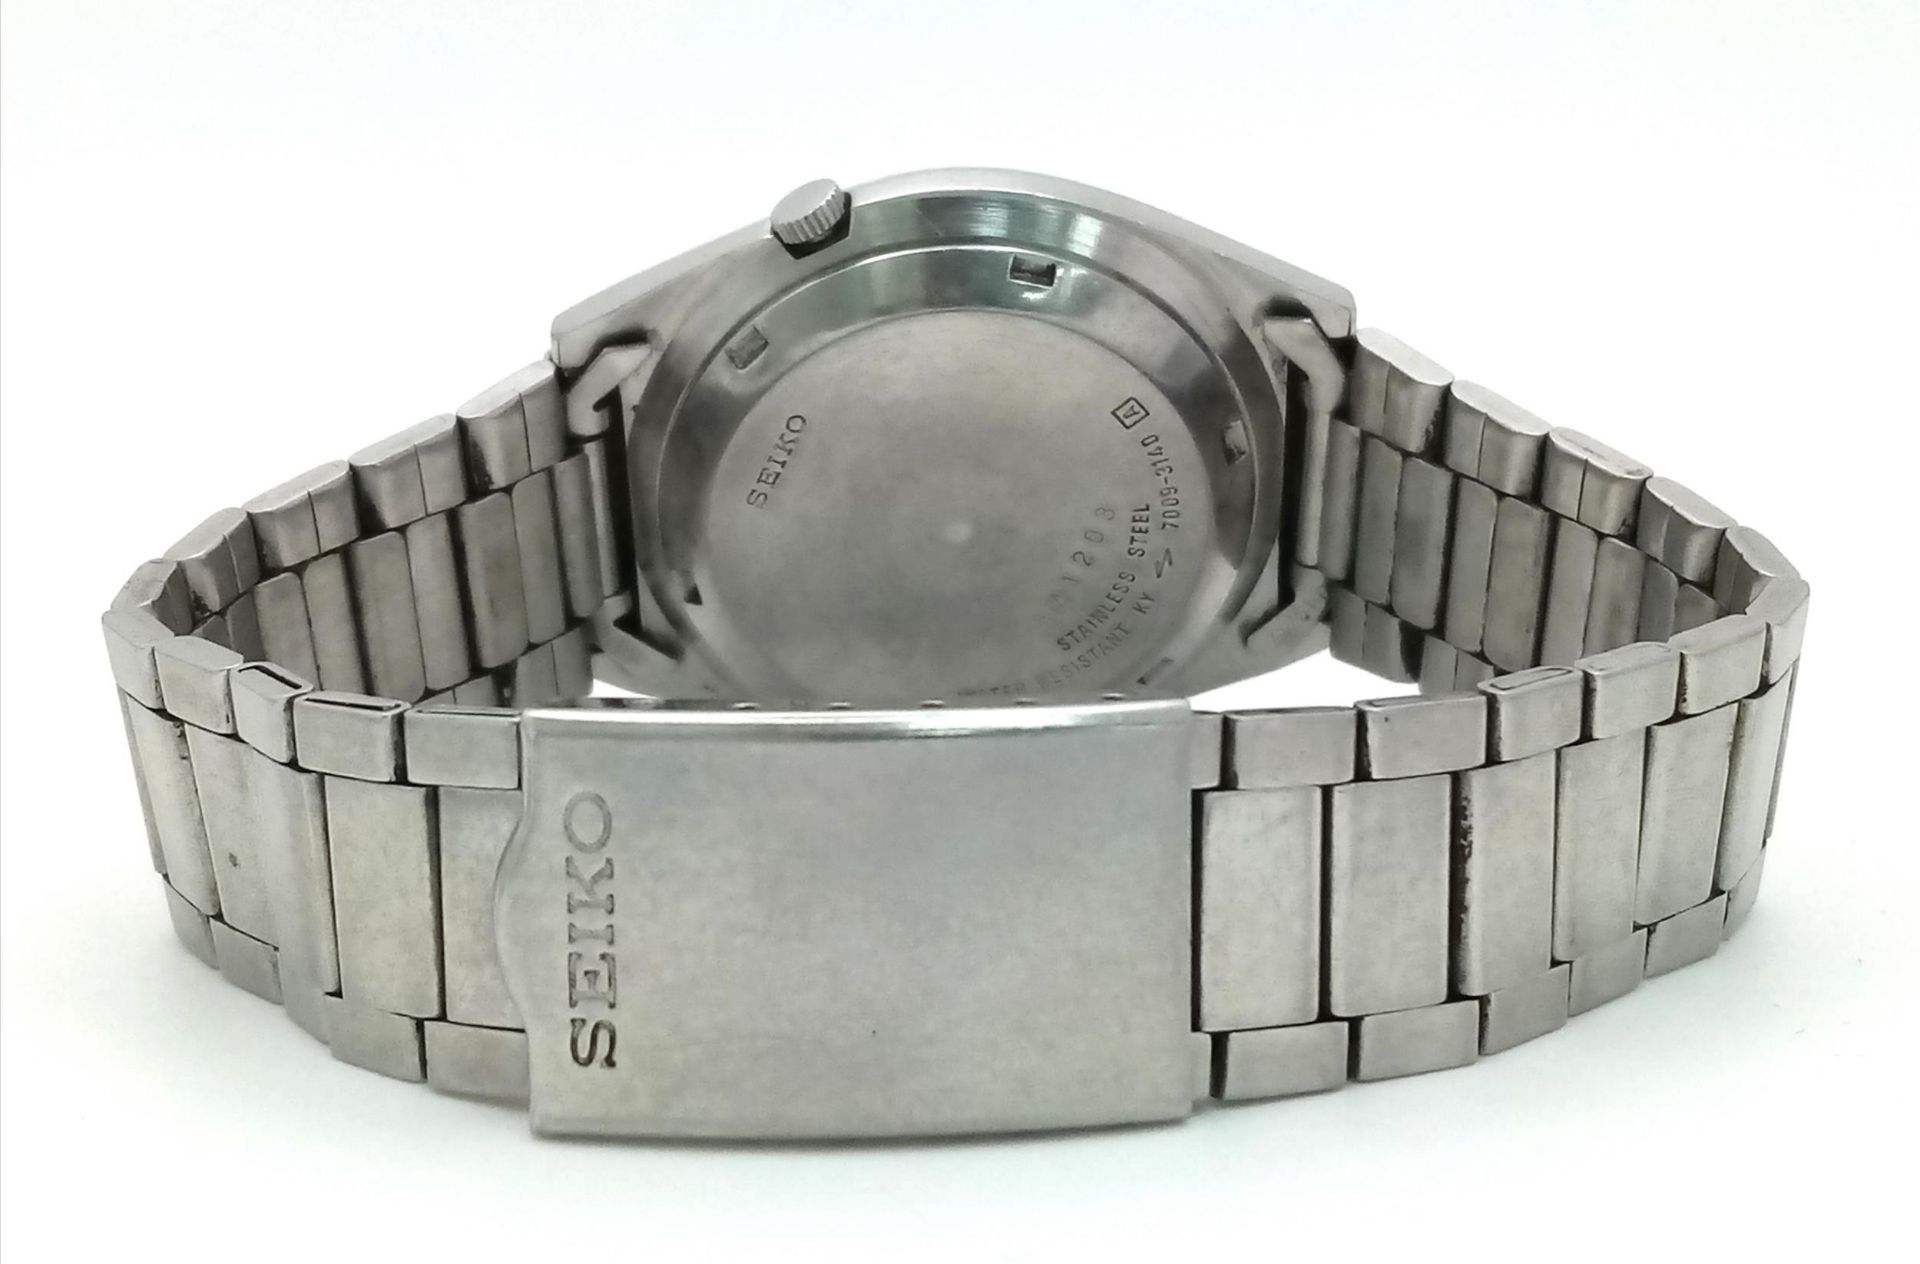 A Vintage Seiko 5 Automatic Gents Watch. Stainless steel bracelet and case - 37mm. Silver tone - Image 6 of 7